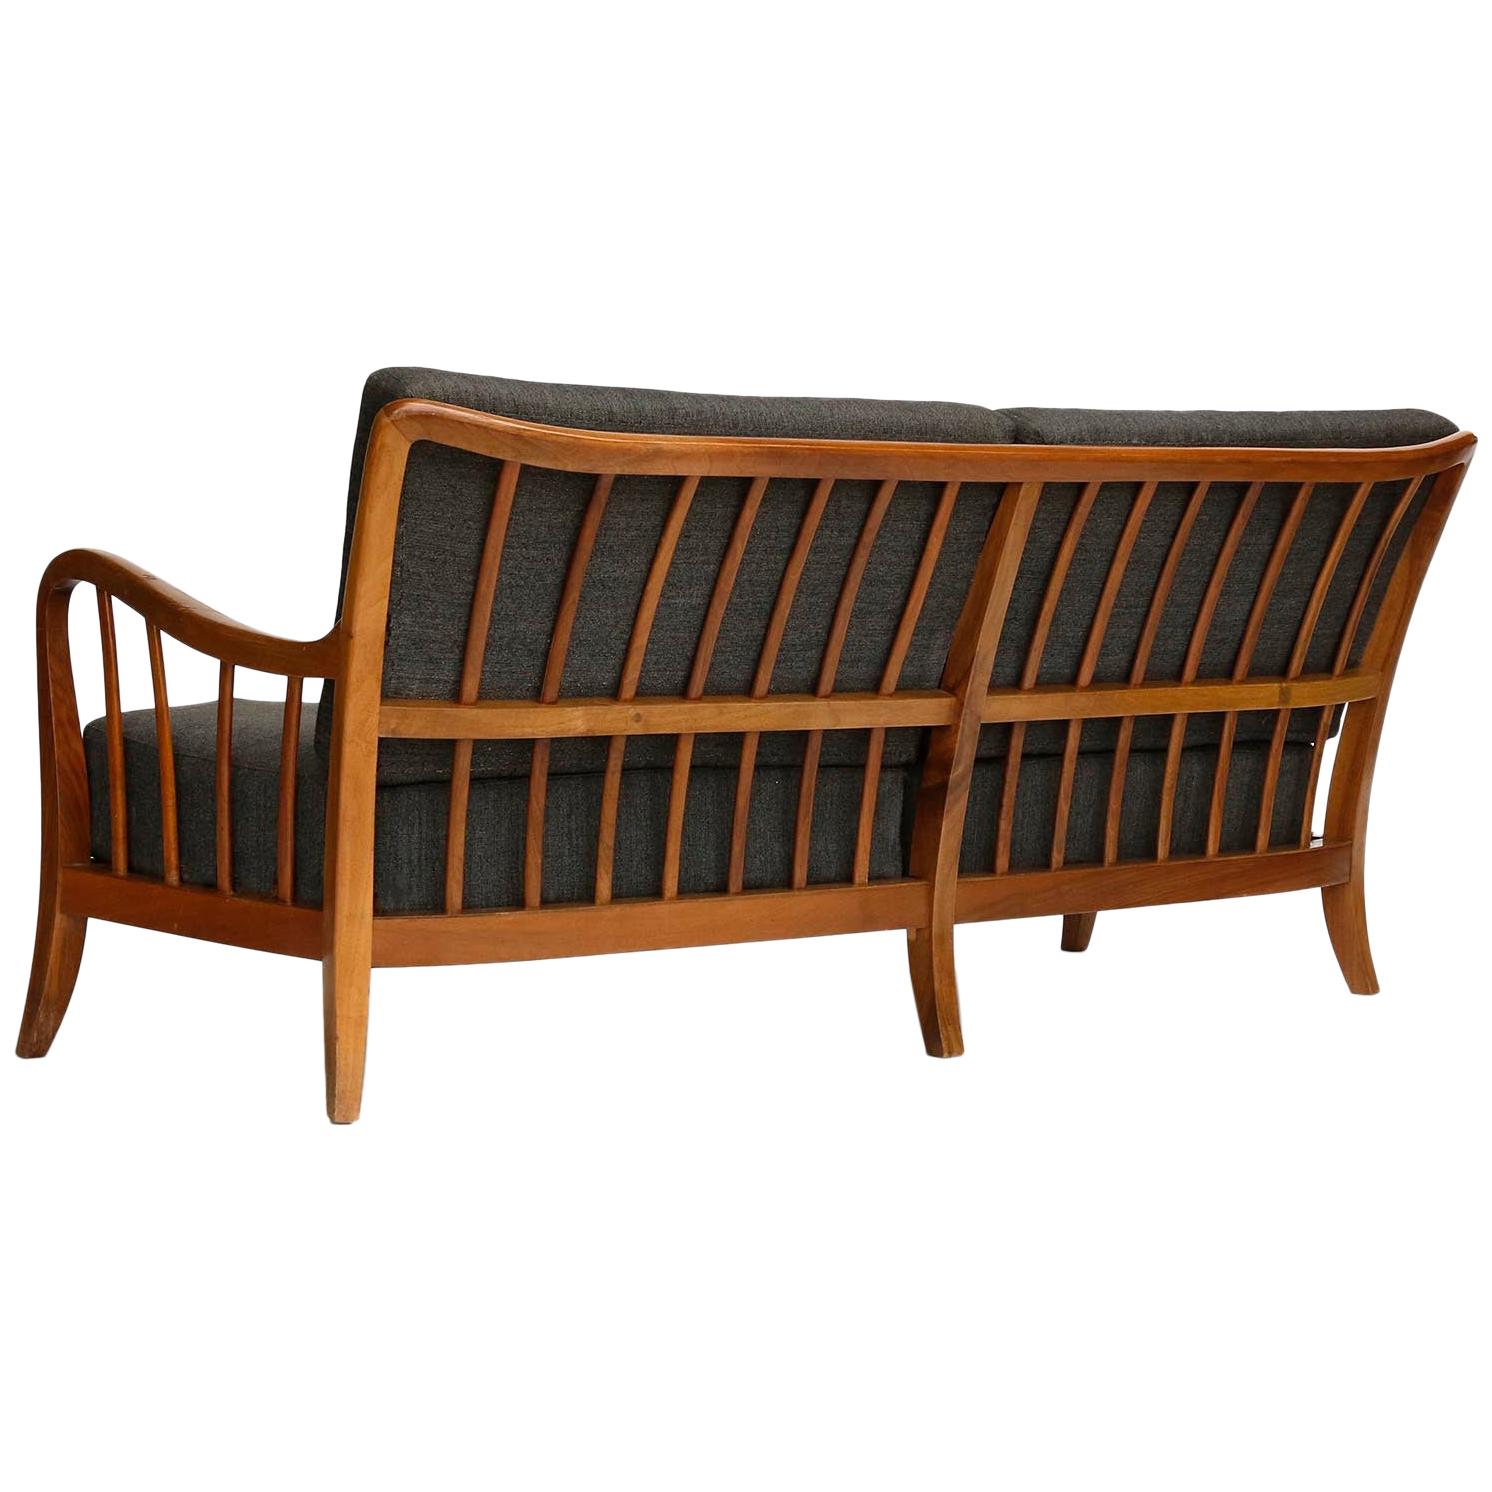 Seette Bench Seat Attributed to Josef Frank, Walnut Wood, Thonet, 1940